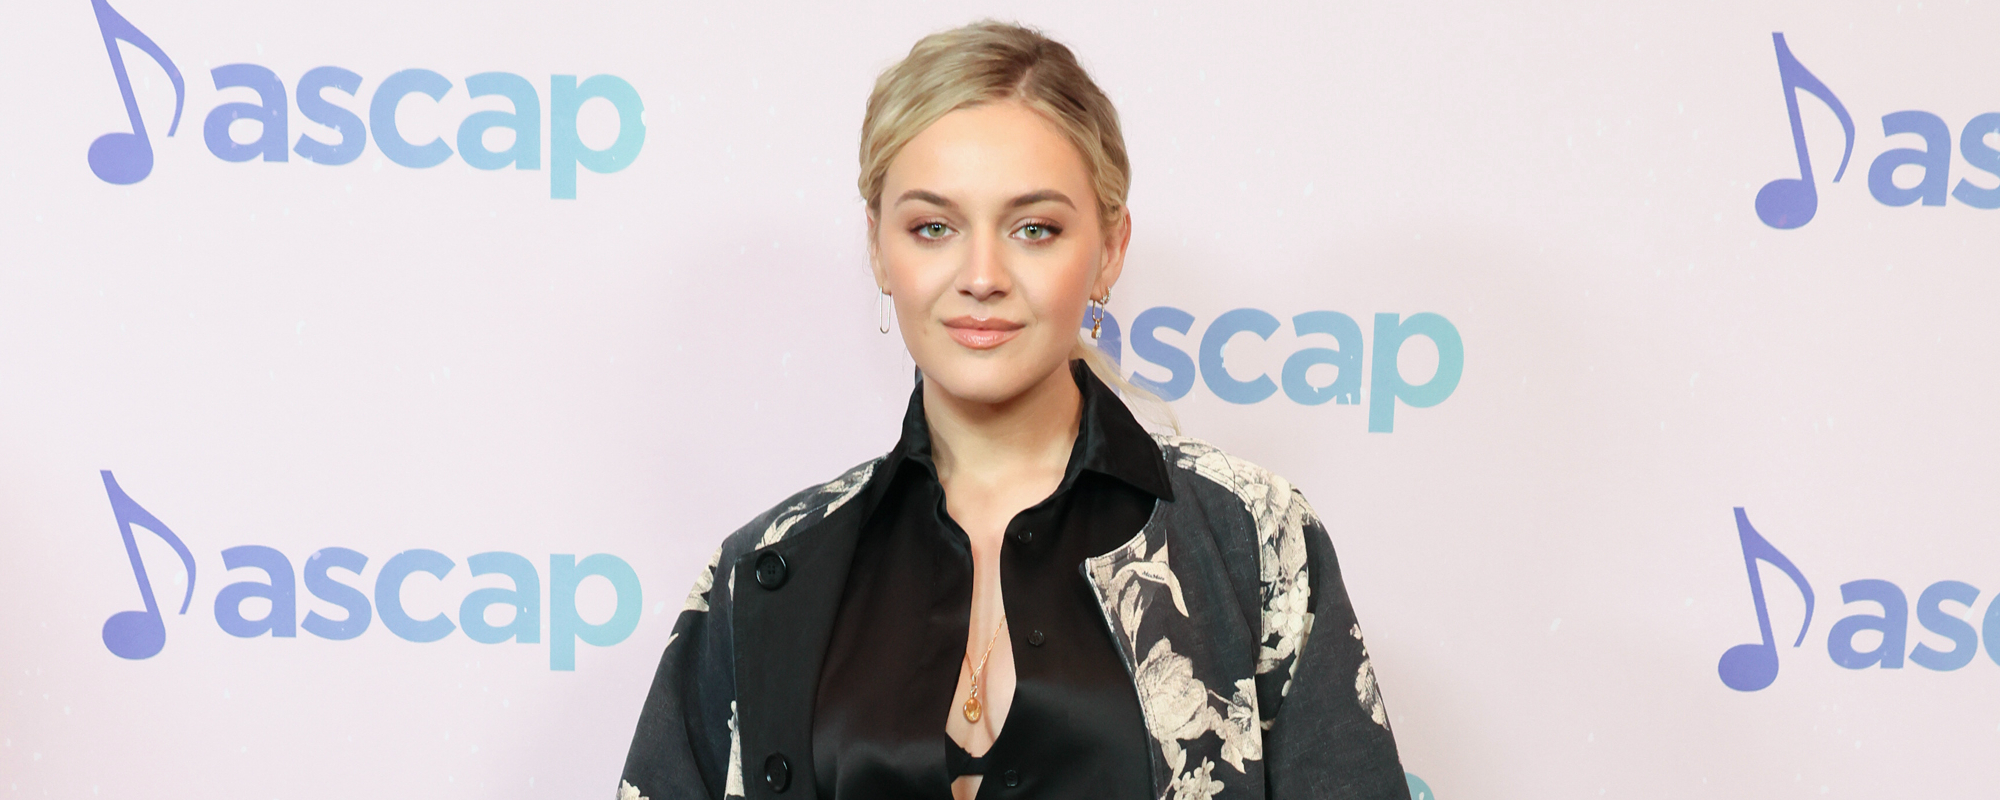 Kelsea Ballerini Doesn’t Mince Words Over Her “Annoyed” Reaction to Lainey Wilson Beating Her for GRAMMY Award